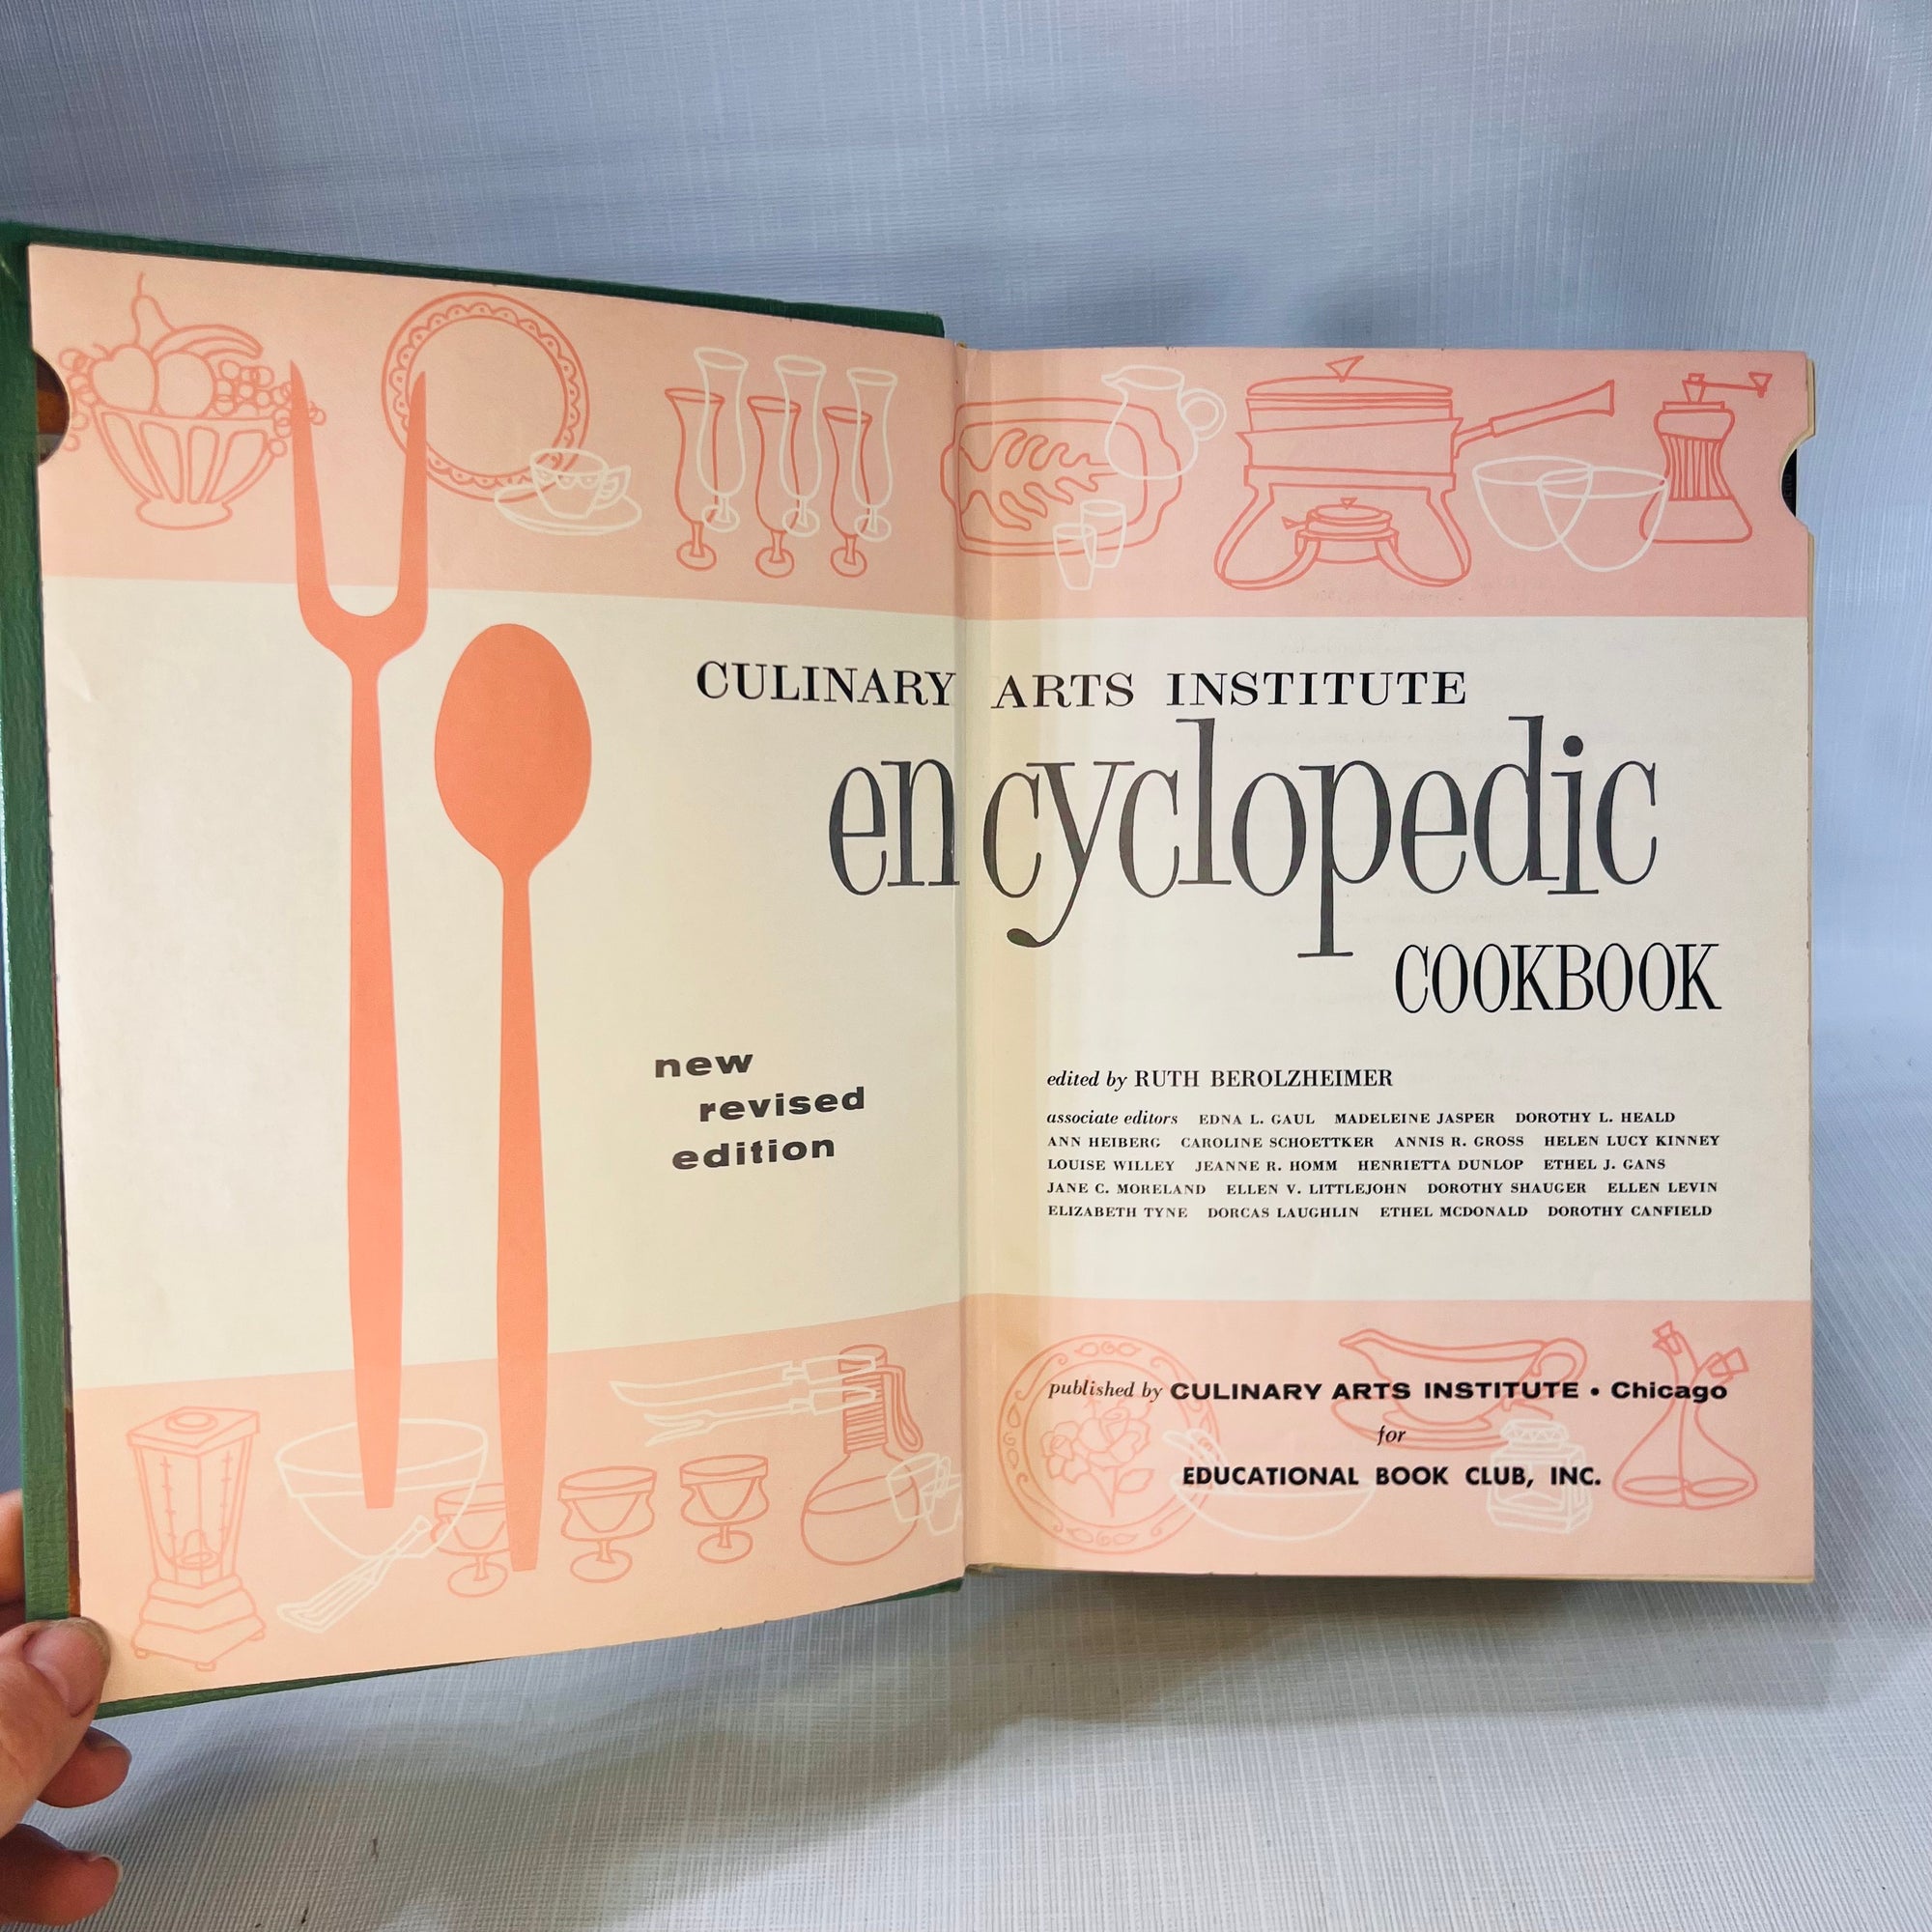 Cooking For Young Homemakers Cookbook by edited by Ruth Berolzheimer 1950 published by The Culinary Arts Institute